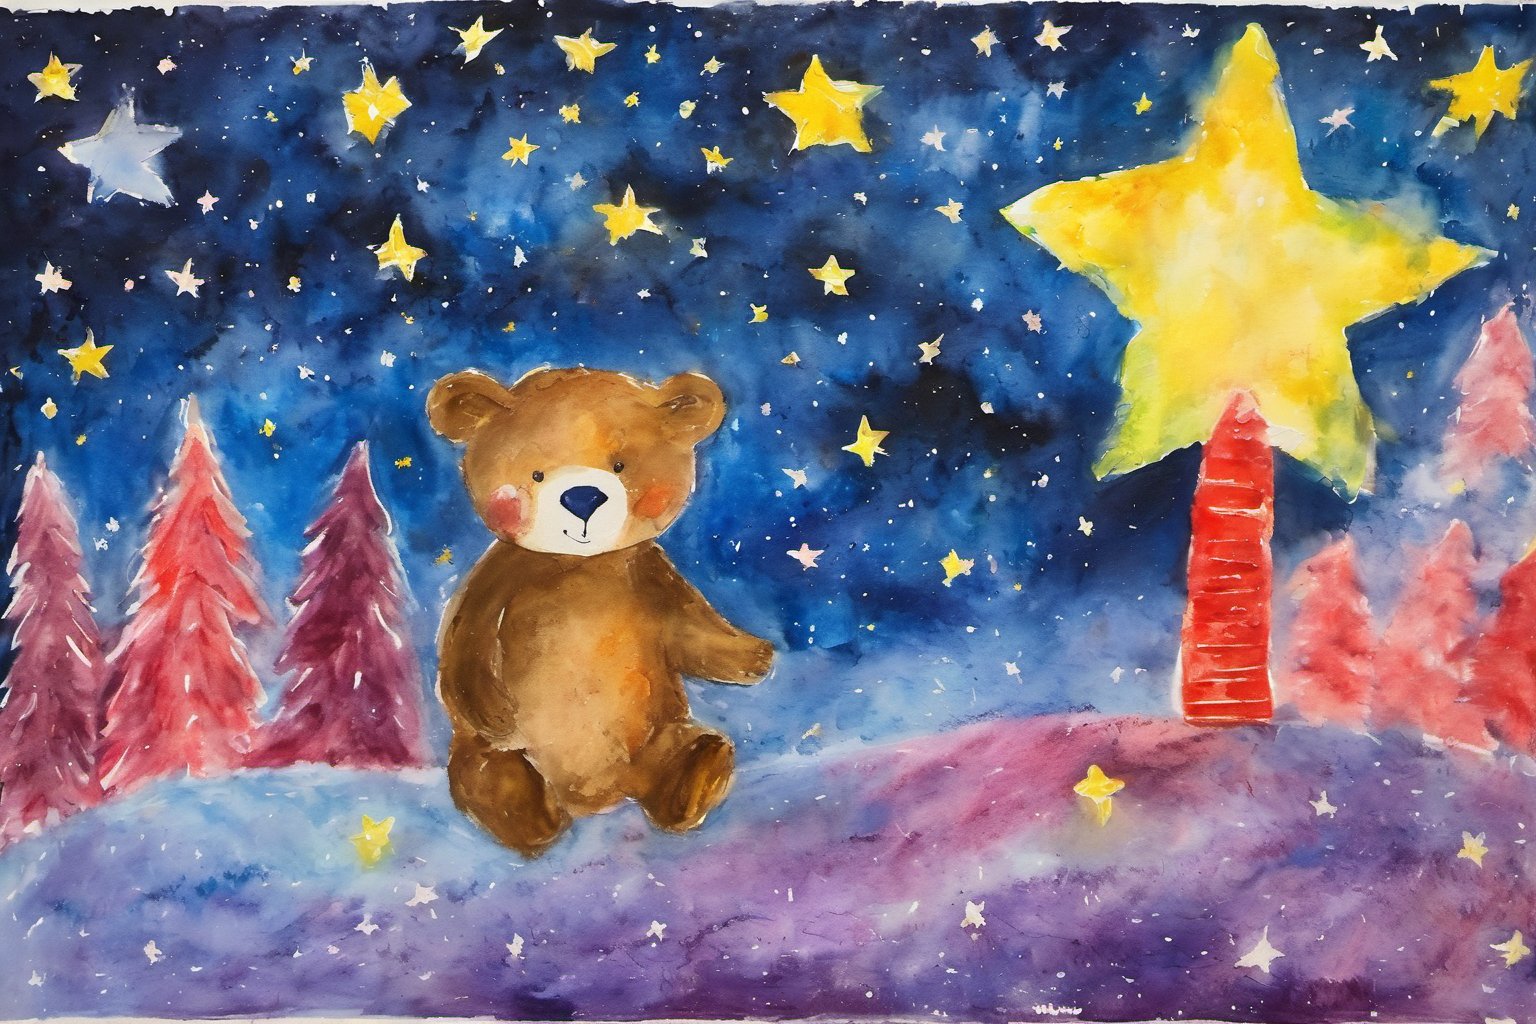 Children's painting, color painting, One night, Little Bear saw a very bright star twinkling at him. He asked, "Hello, Star, why are you so bright?"
The star gently replied, "I'm here to keep you company, so you won't feel lonely at night."
Little Bear felt very happy and said, "Thank you, Star. Can you tell me about your life in the sky?"